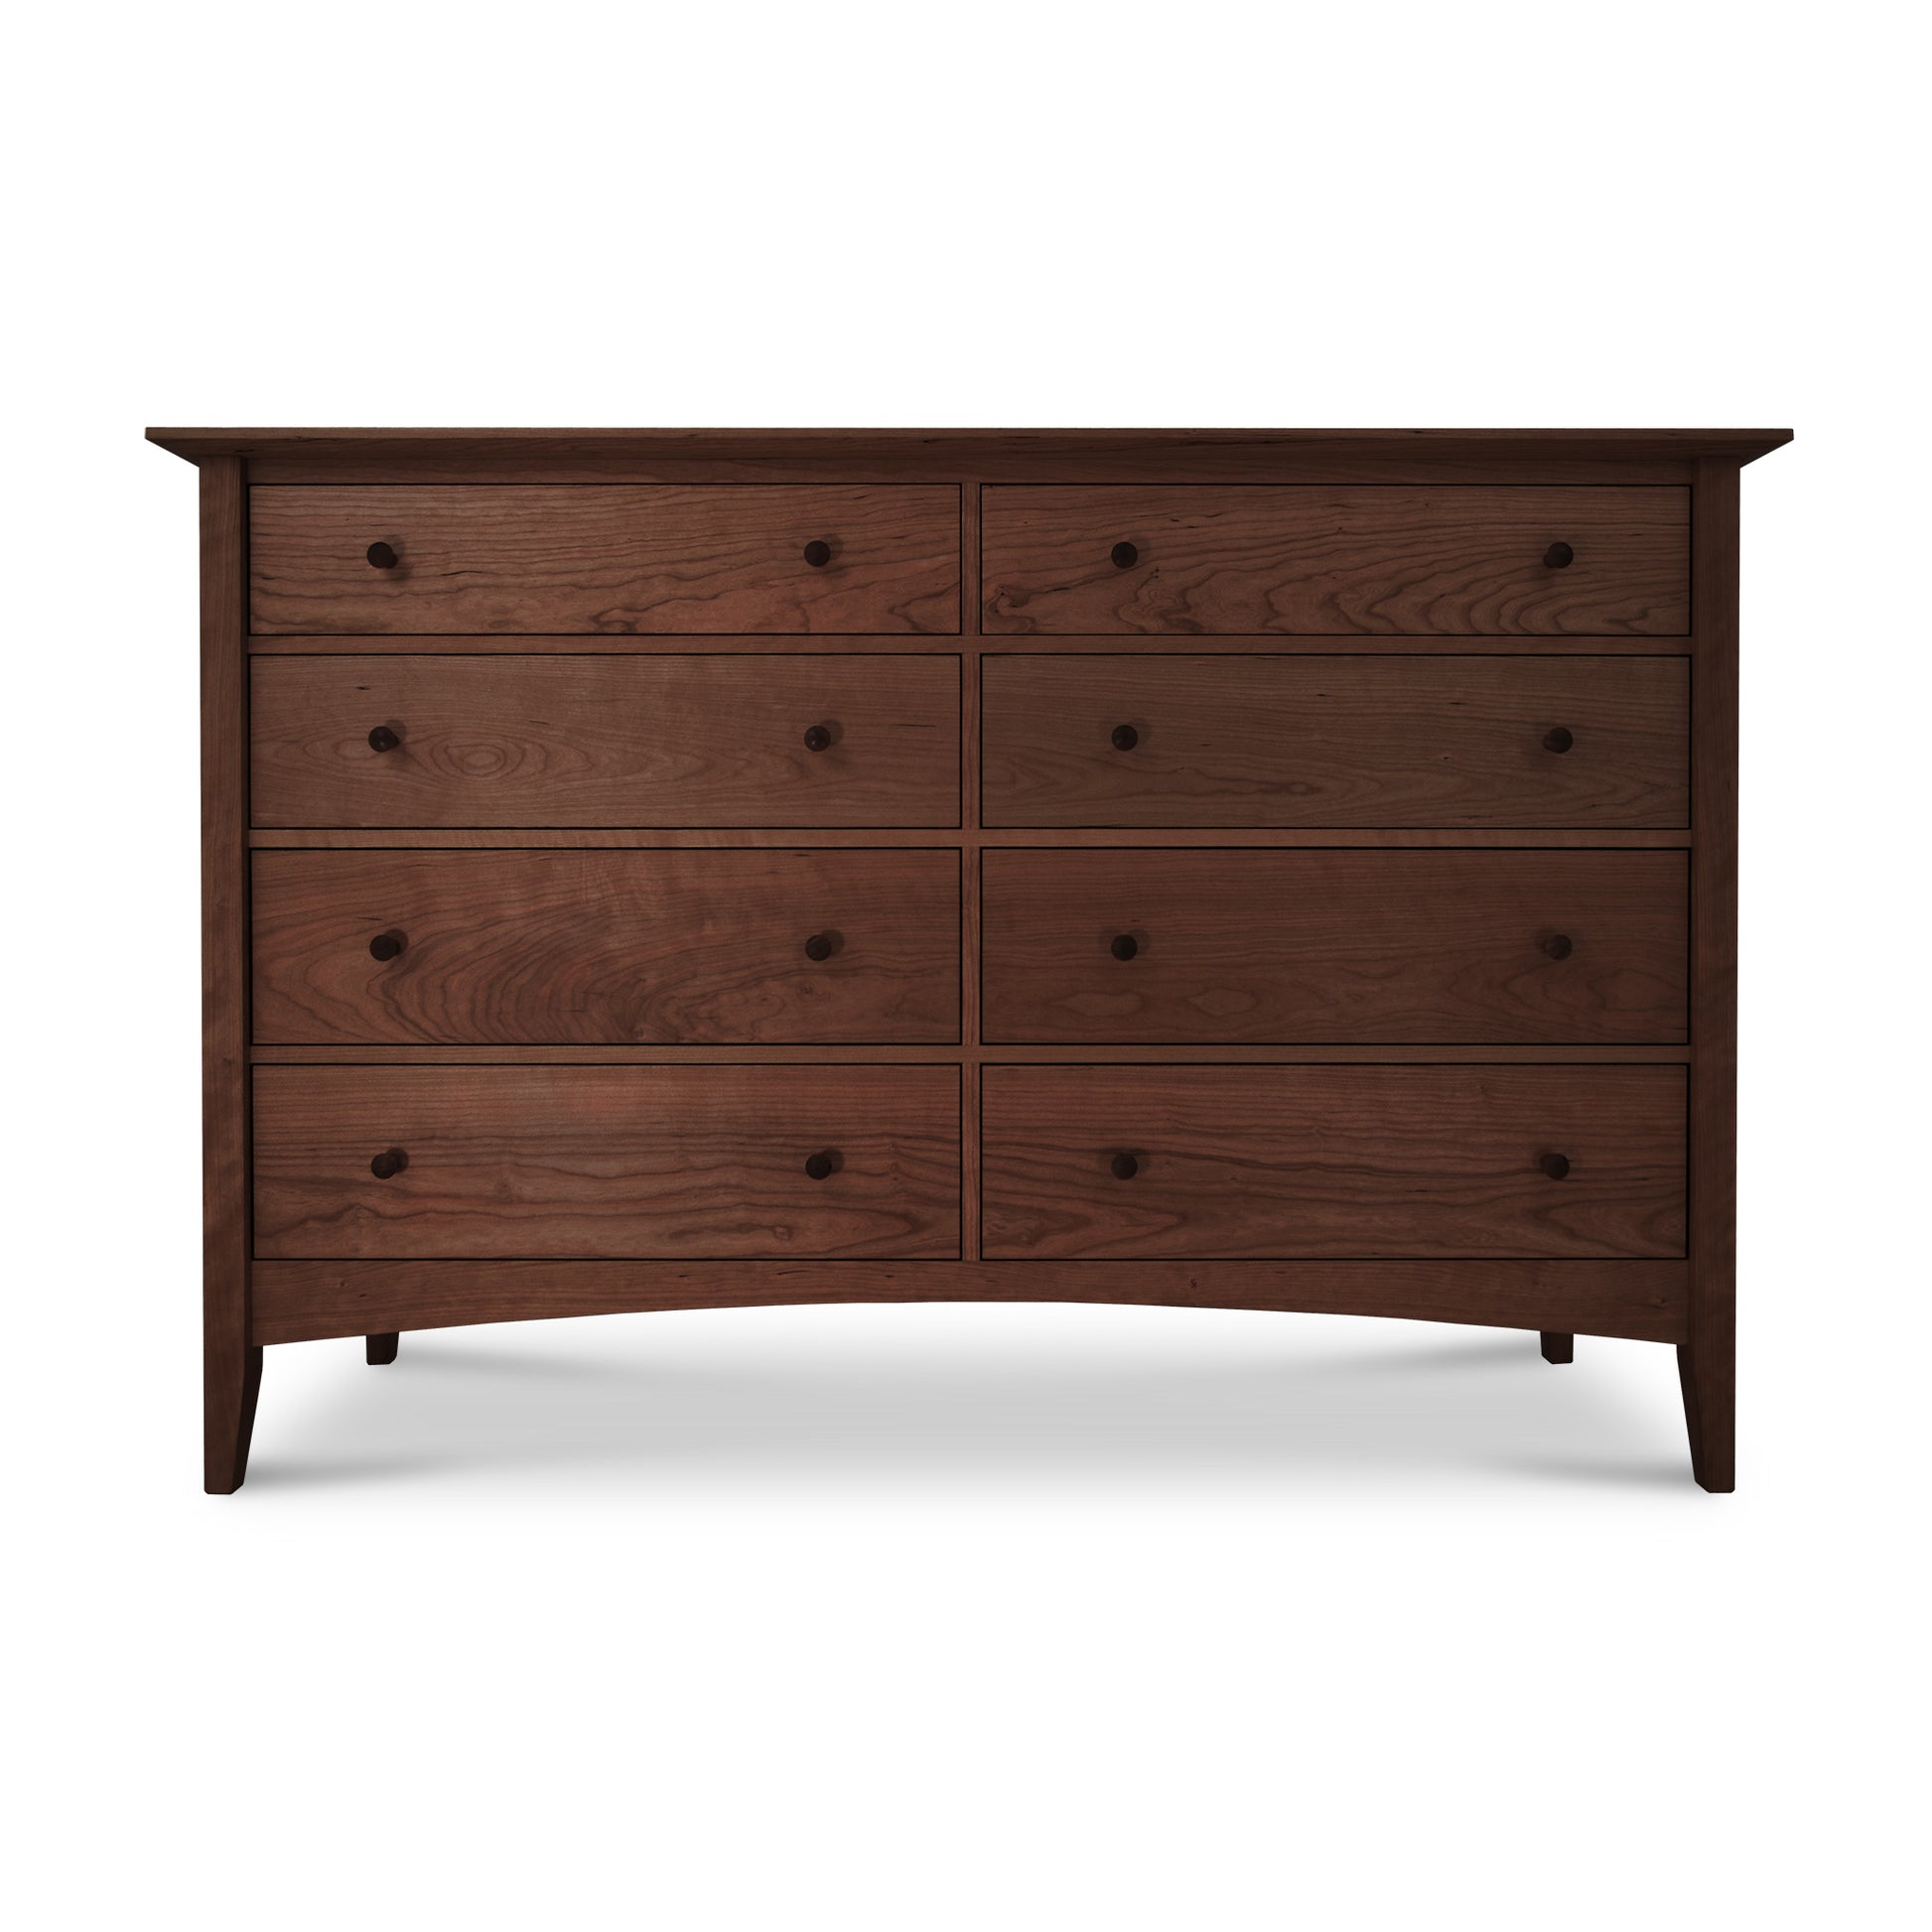 A Maple Corner Woodworks American Shaker 8-Drawer Dresser with nine drawers, featuring a rich dark brown finish and simple round knobs on a white background.